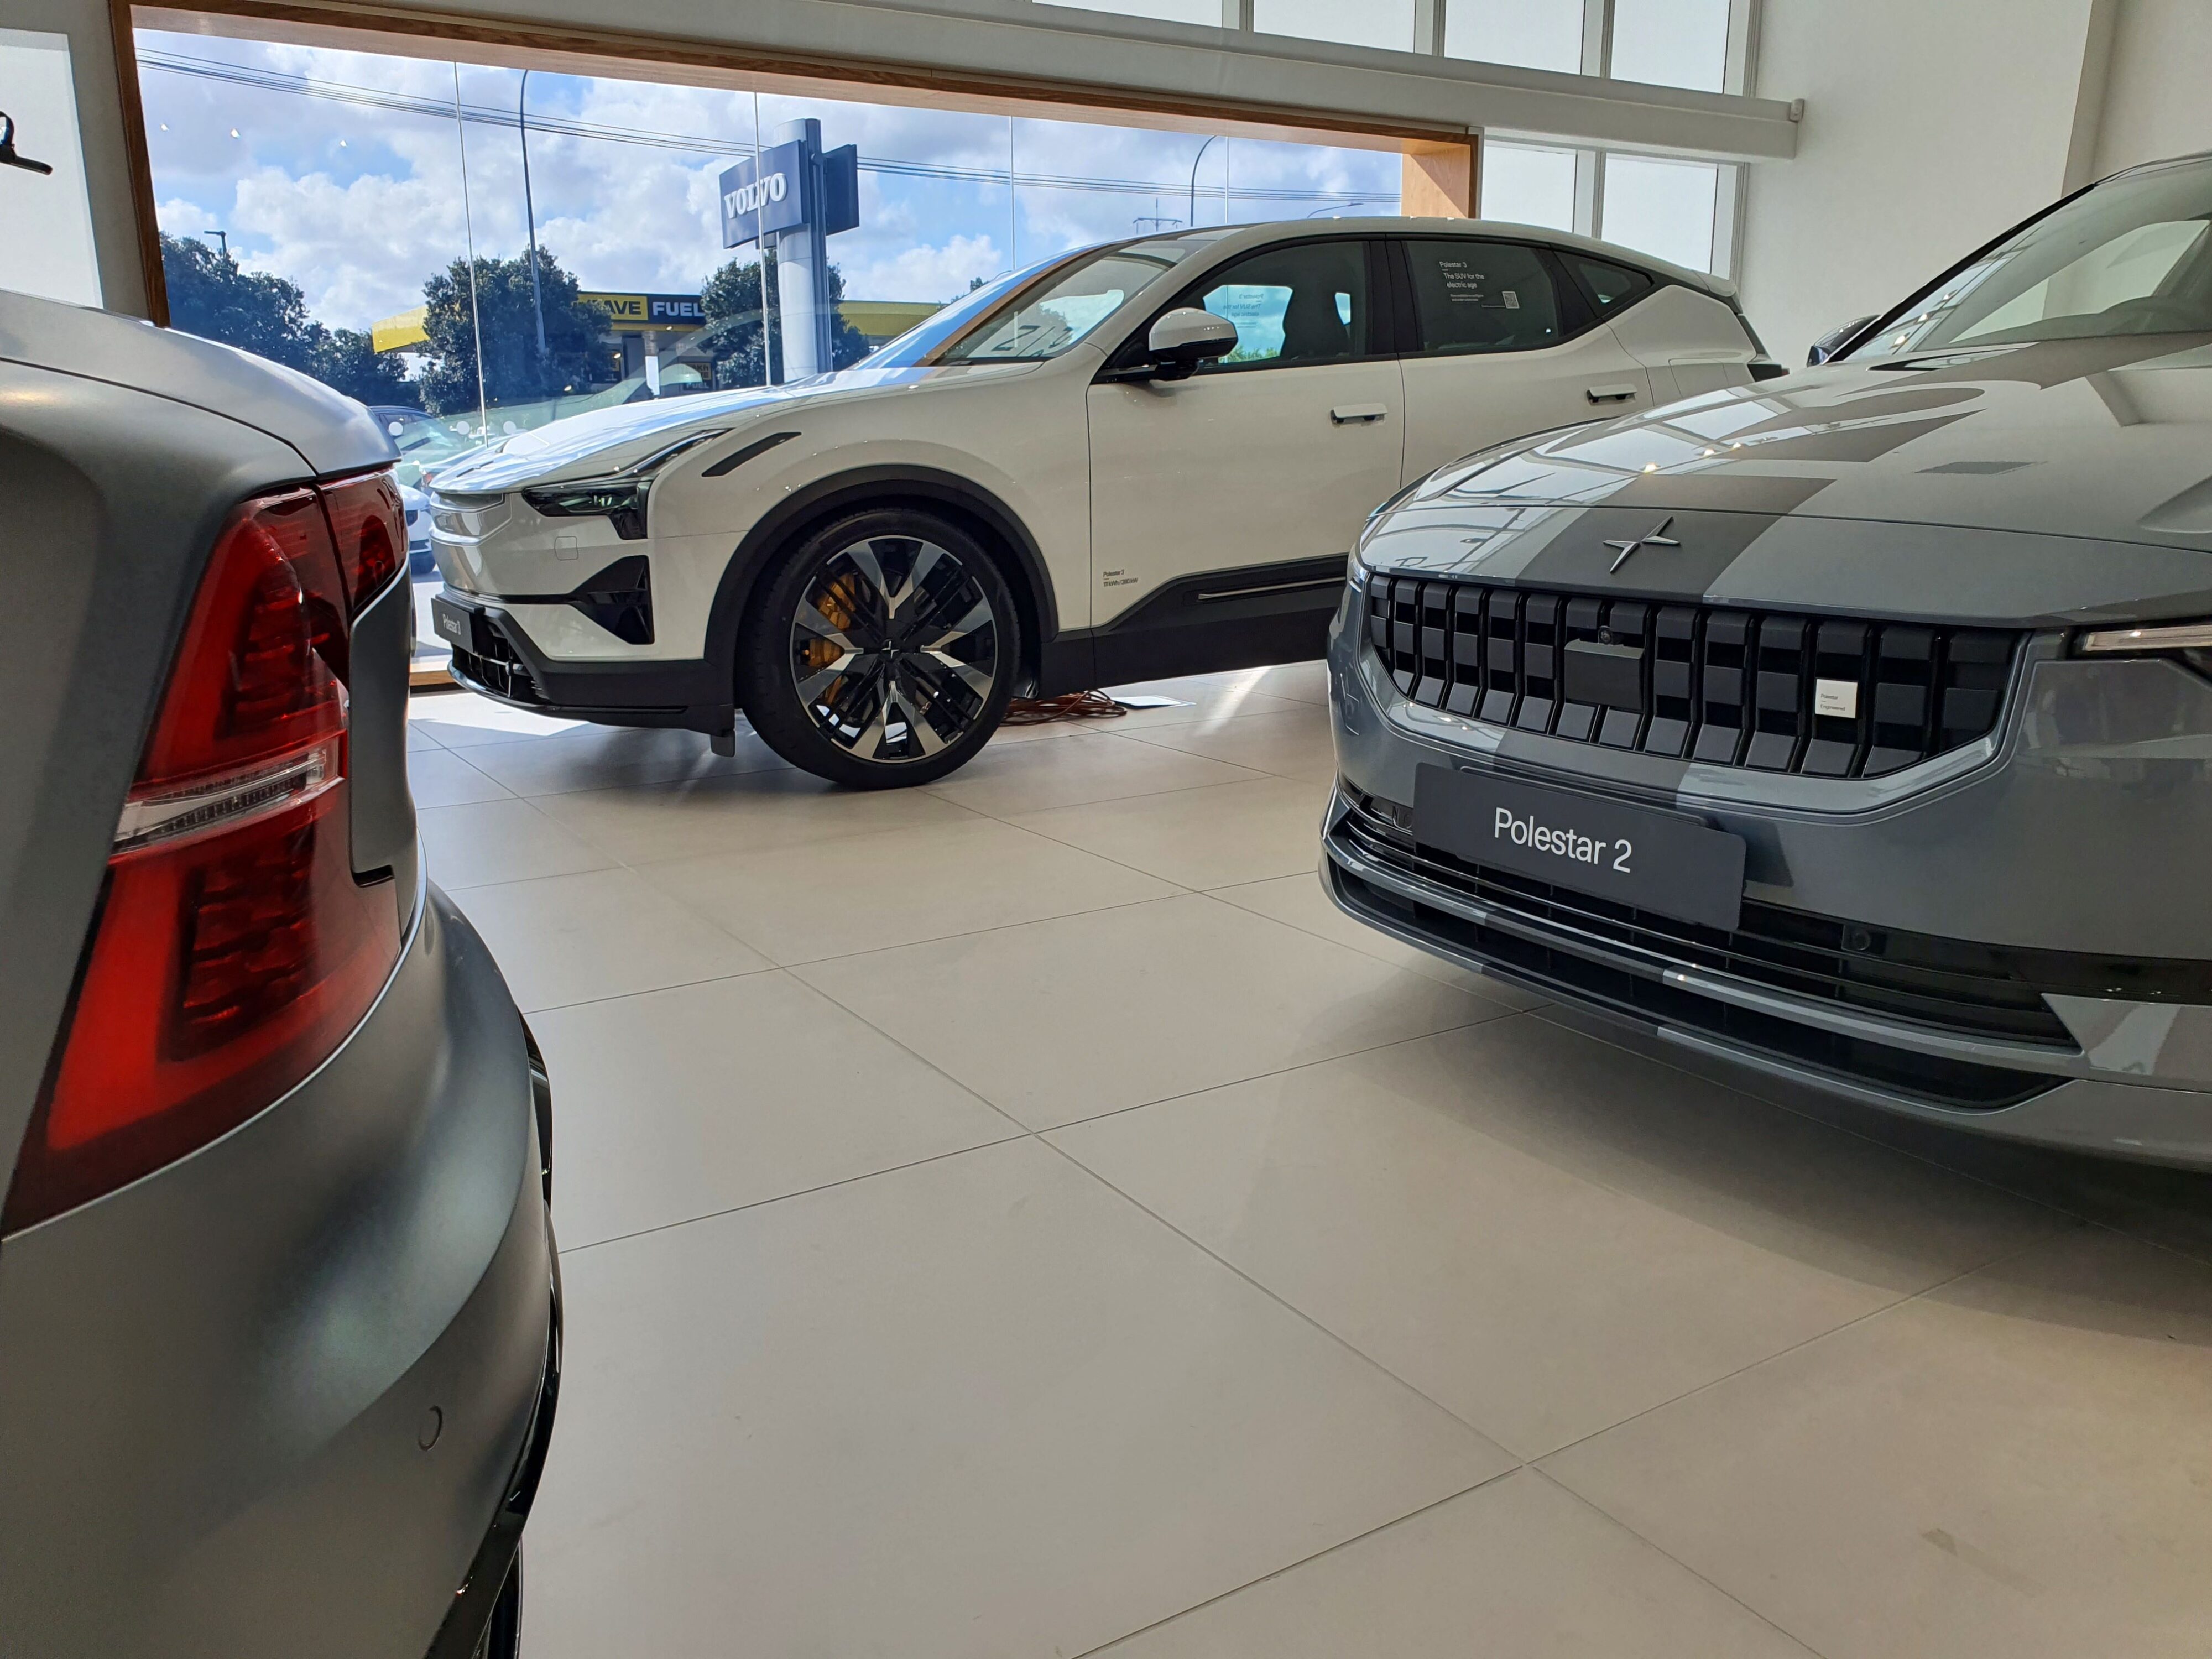 A photo with a Gray Polestar 1 in the foreground, a Gray Polestar 2 on the right and a White Polestar 3 in the background.